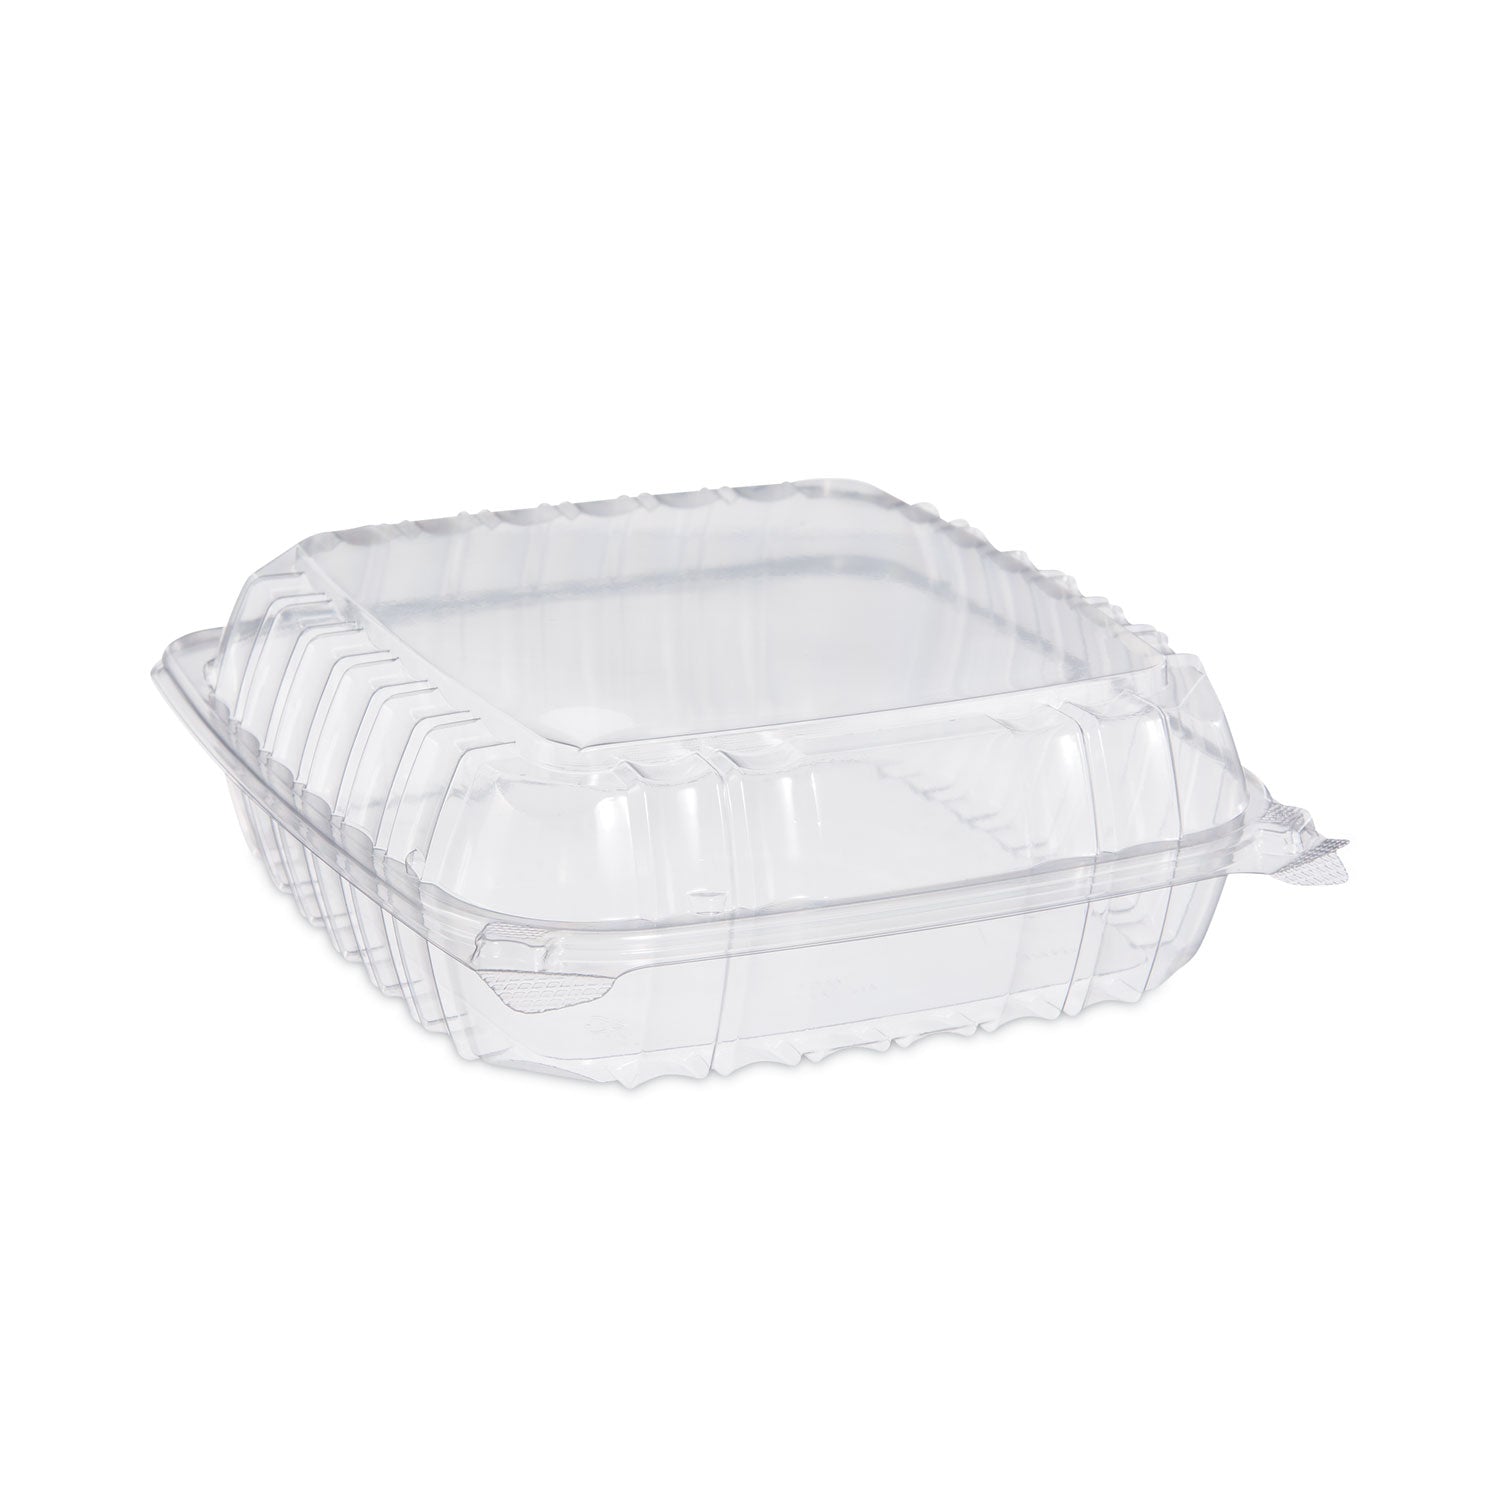 ClearSeal Hinged-Lid Plastic Containers, 9.3 x 8.8 x 3, Clear, Plastic, 100/Bag, 2 Bags/Carton - 